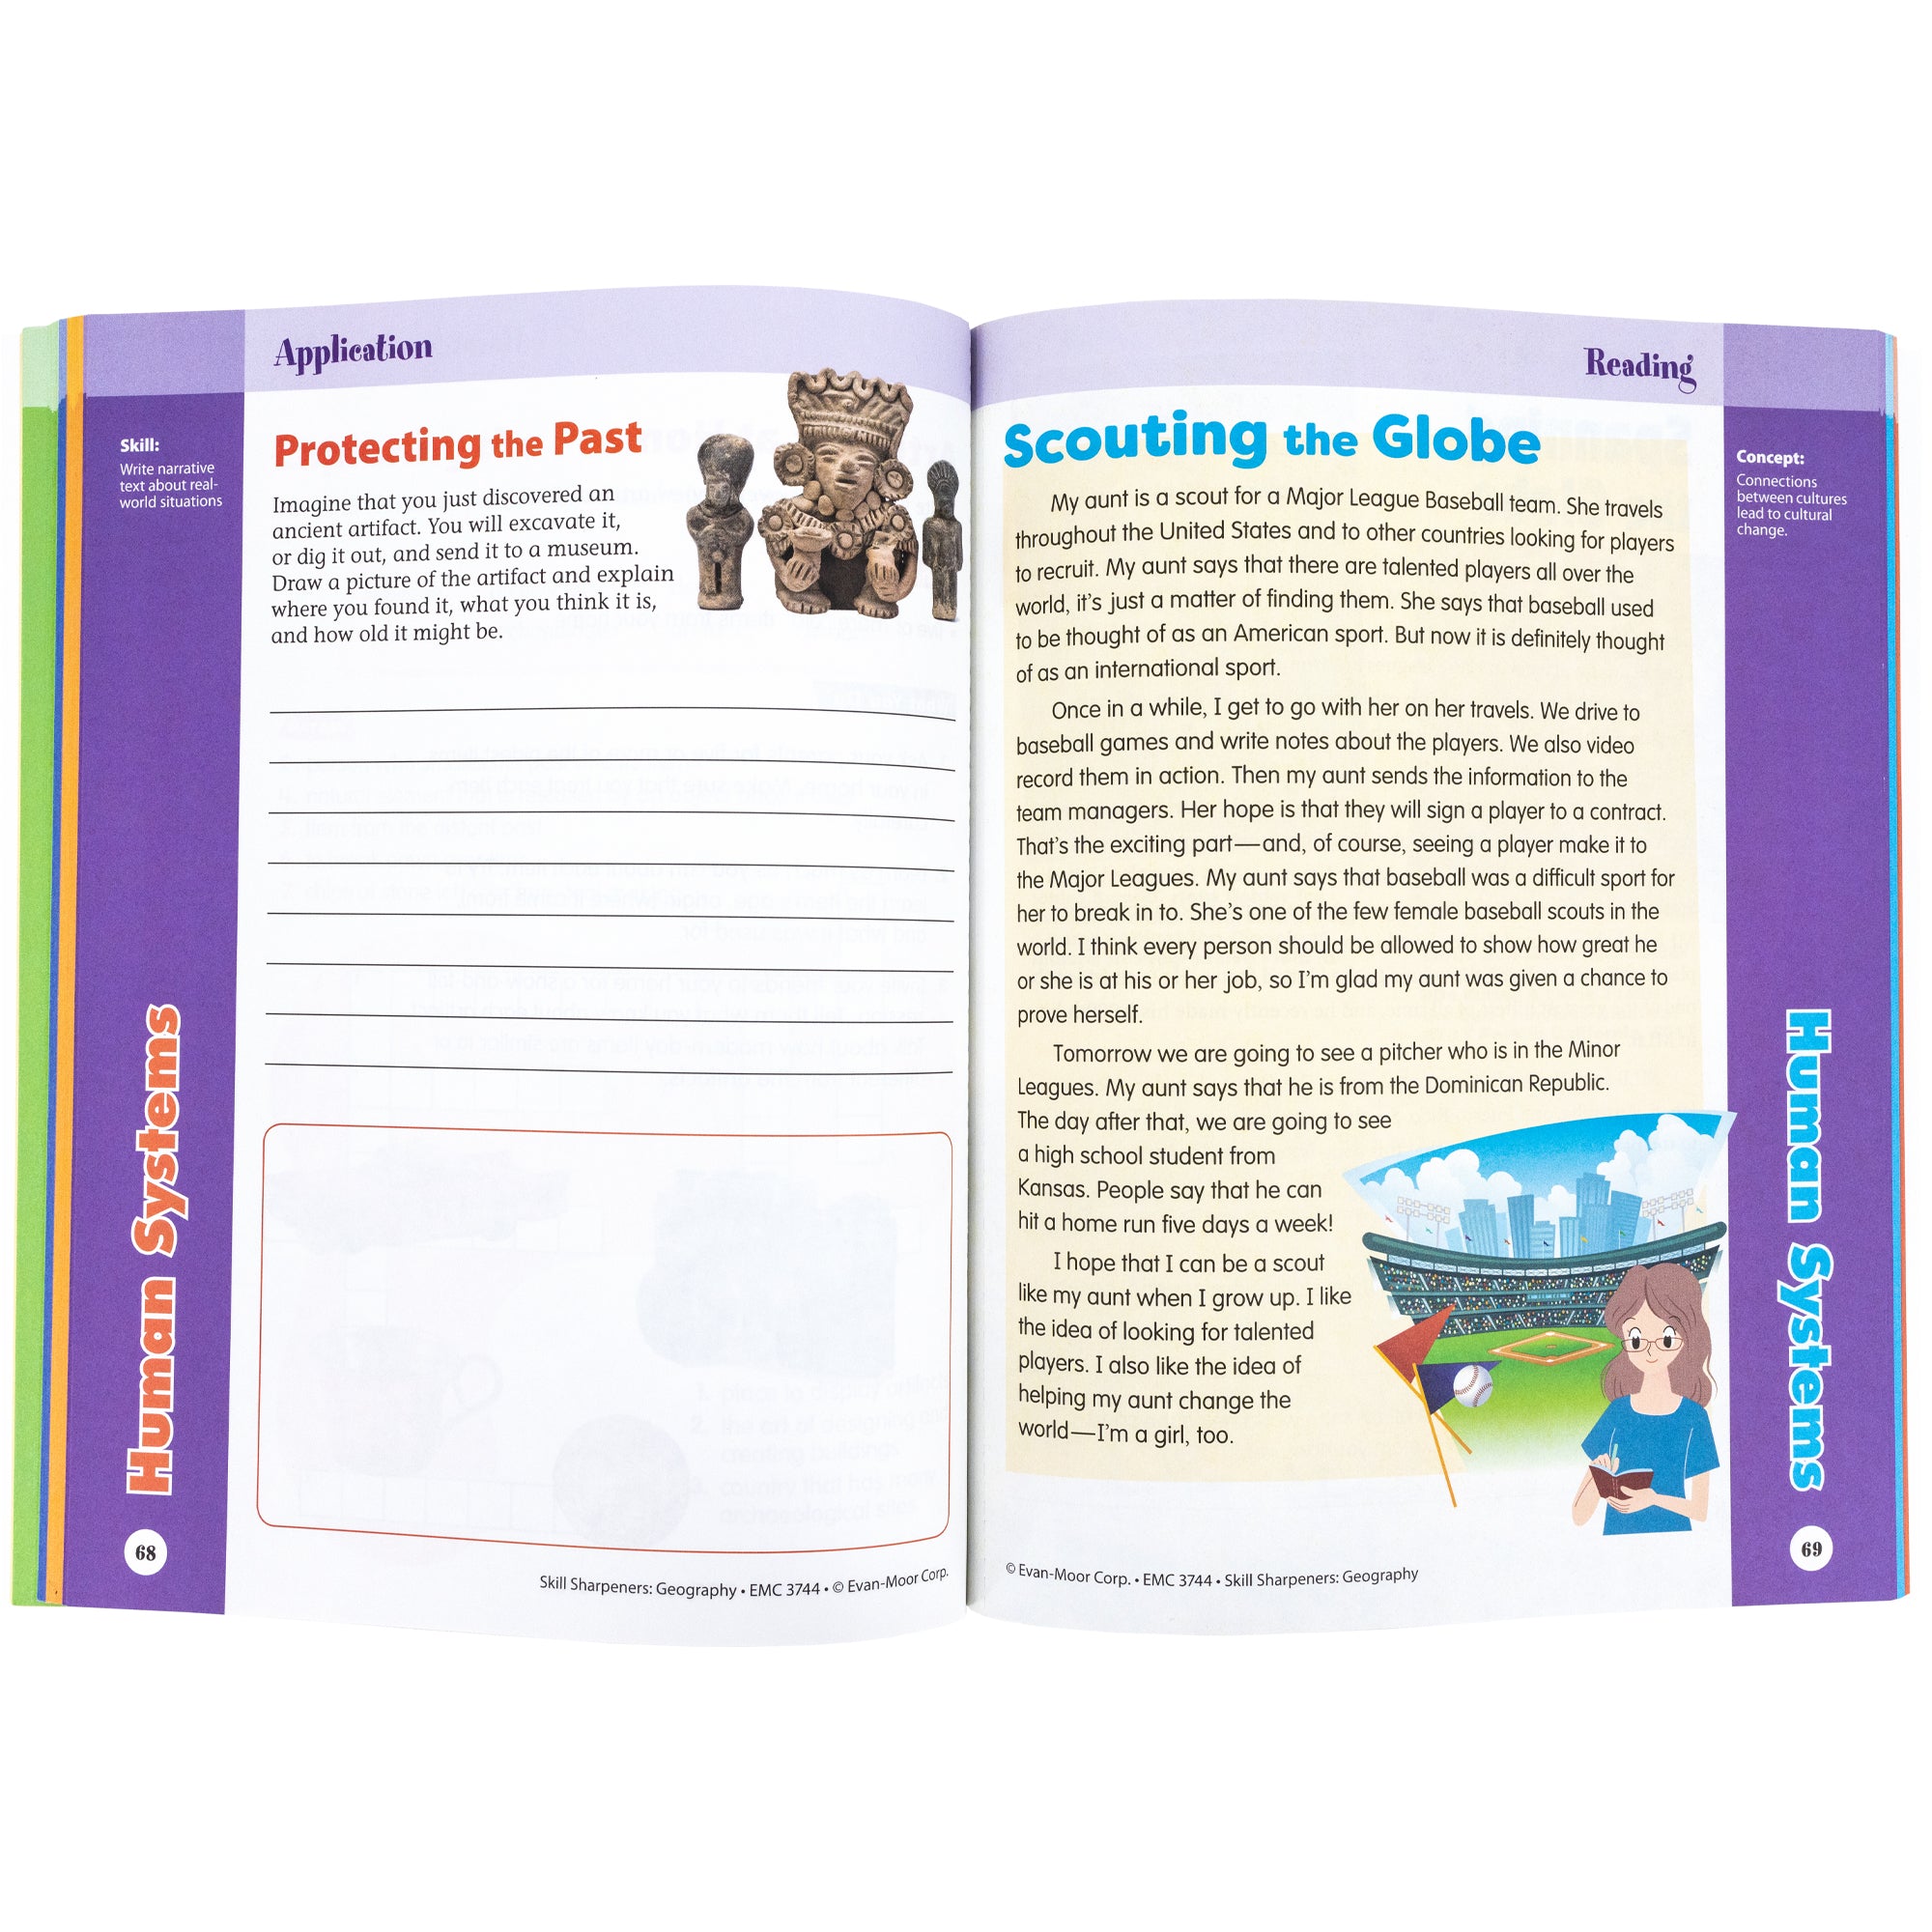 Skill Sharpeners Geography Grade 4 book open to show inside pages. The pages are white with purple borders on the top and outside edges with titles inside the borders reading “Human Systems, Application,” and “Reading.” The left page, titled “Protecting the Past,” has an image of ancient statues, lines to write about an artifact, and a box to draw an artifact. The right page, titled “Scouting the Globe,” shows an illustration of a woman writing in a notebook inside a baseball stadium and a story about it.